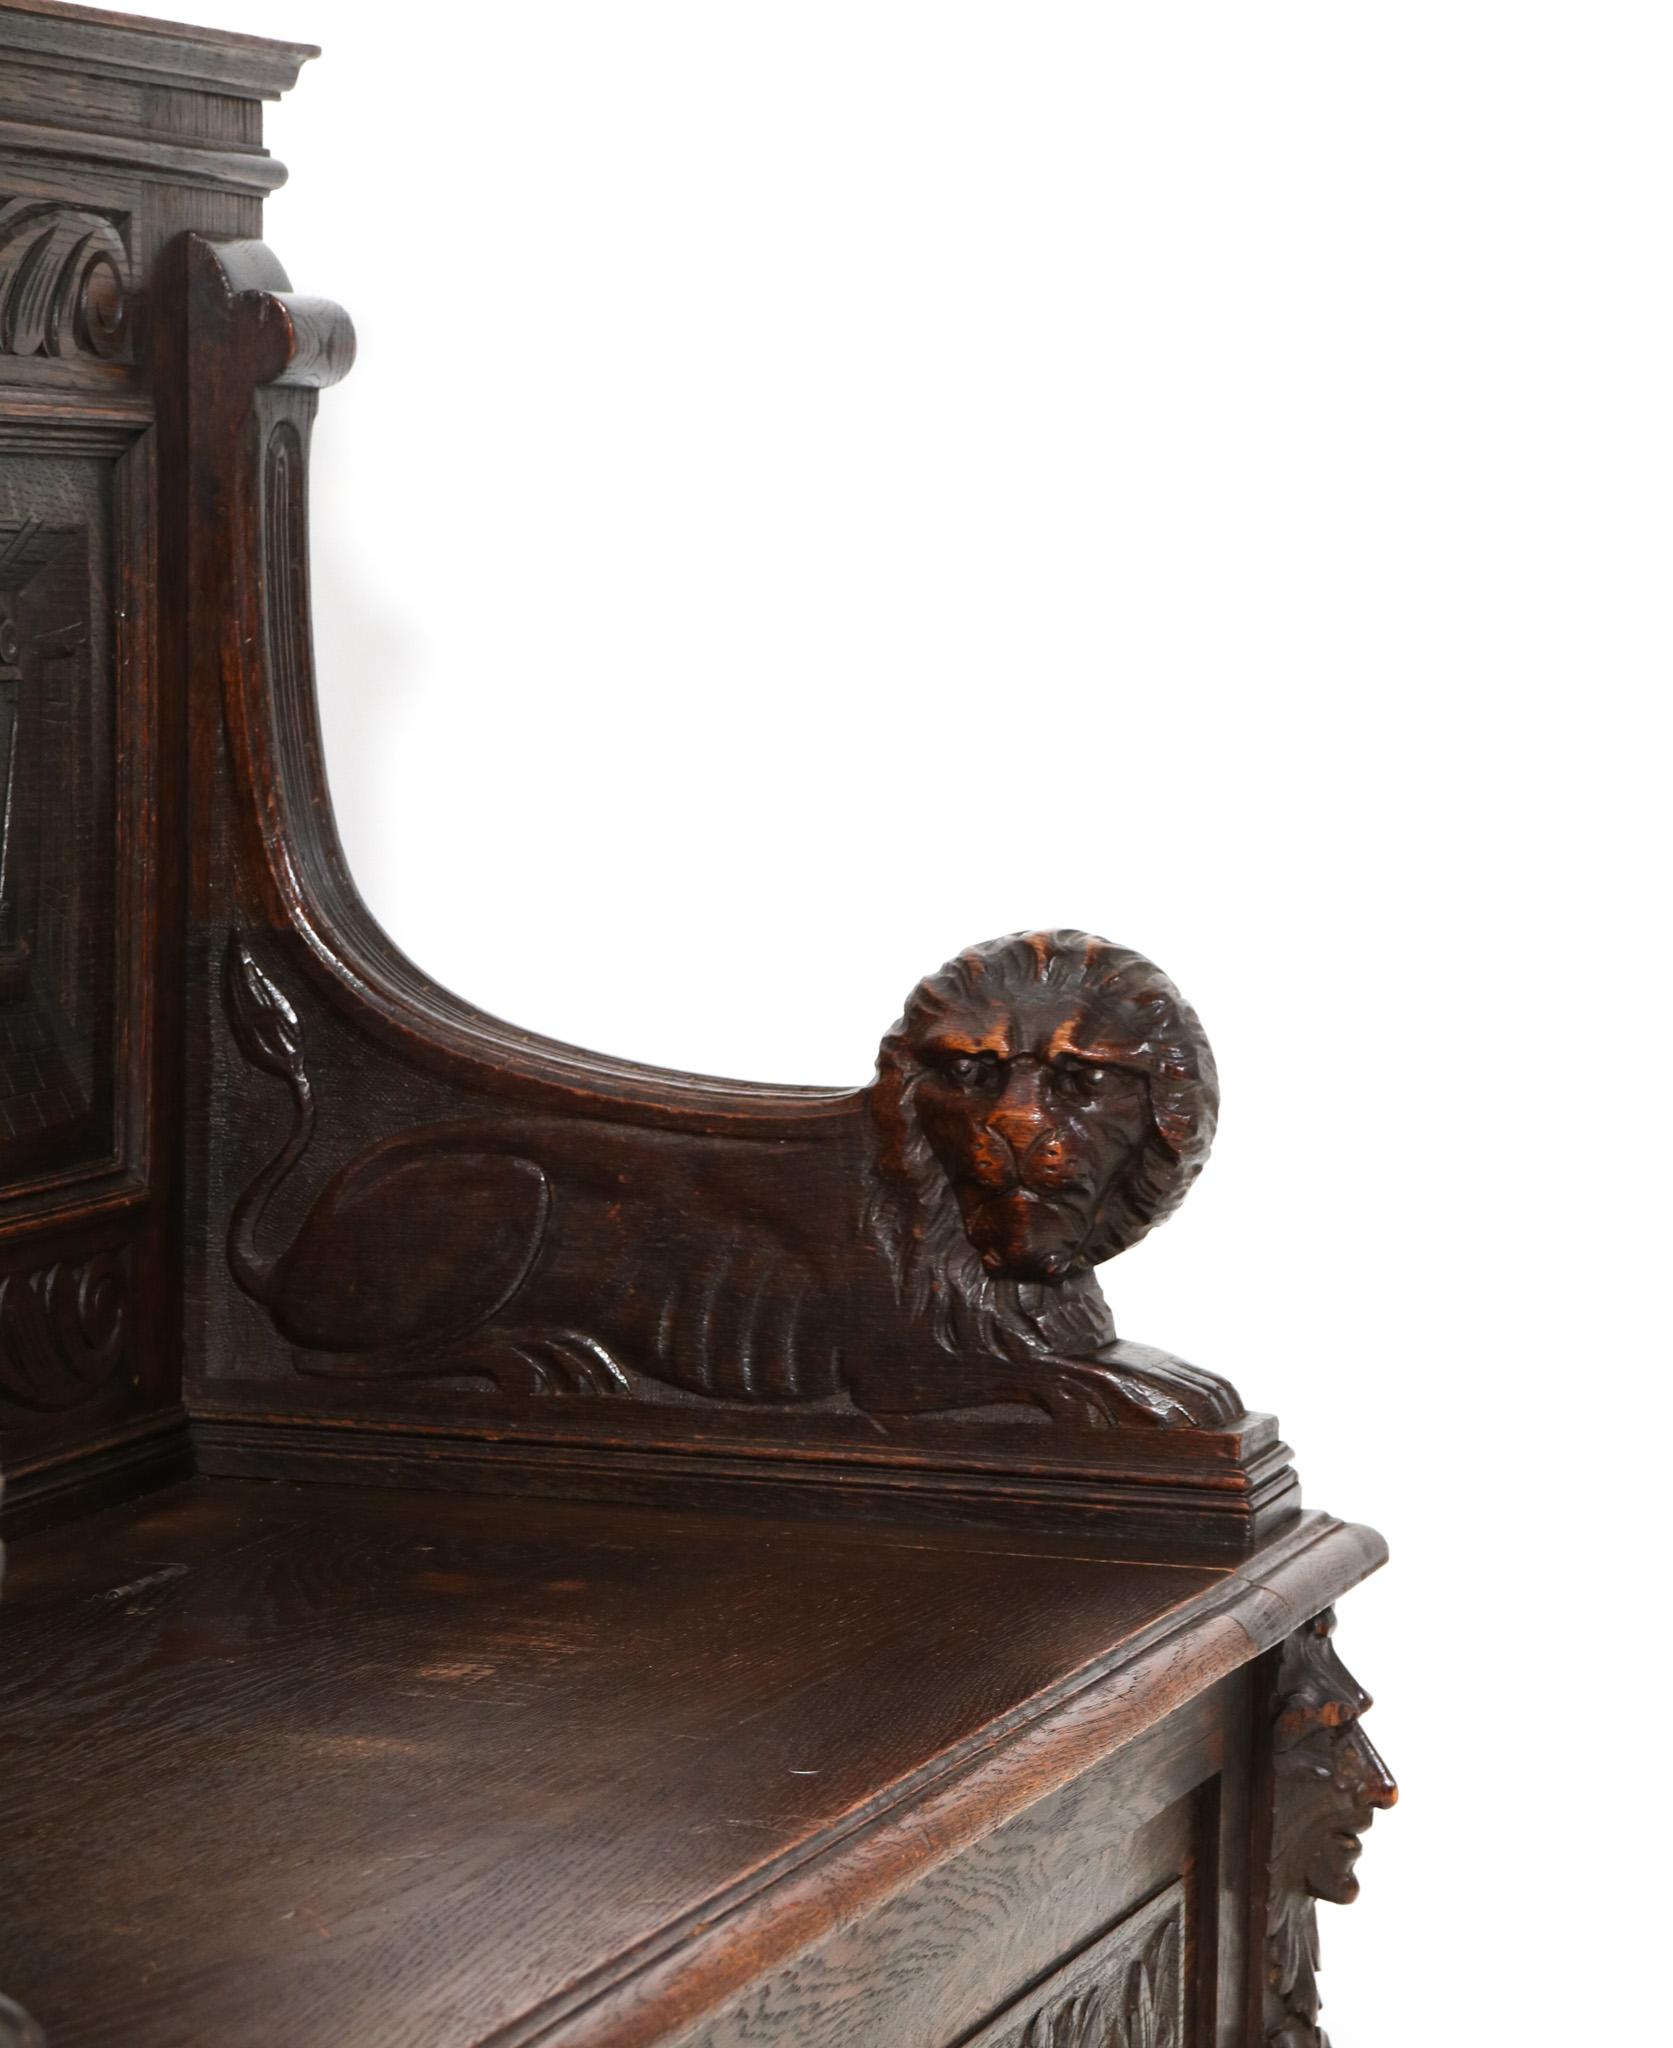 Oak Renaissance Revival Hall Bench with Hand-Carved Lions, 1890s For Sale 2